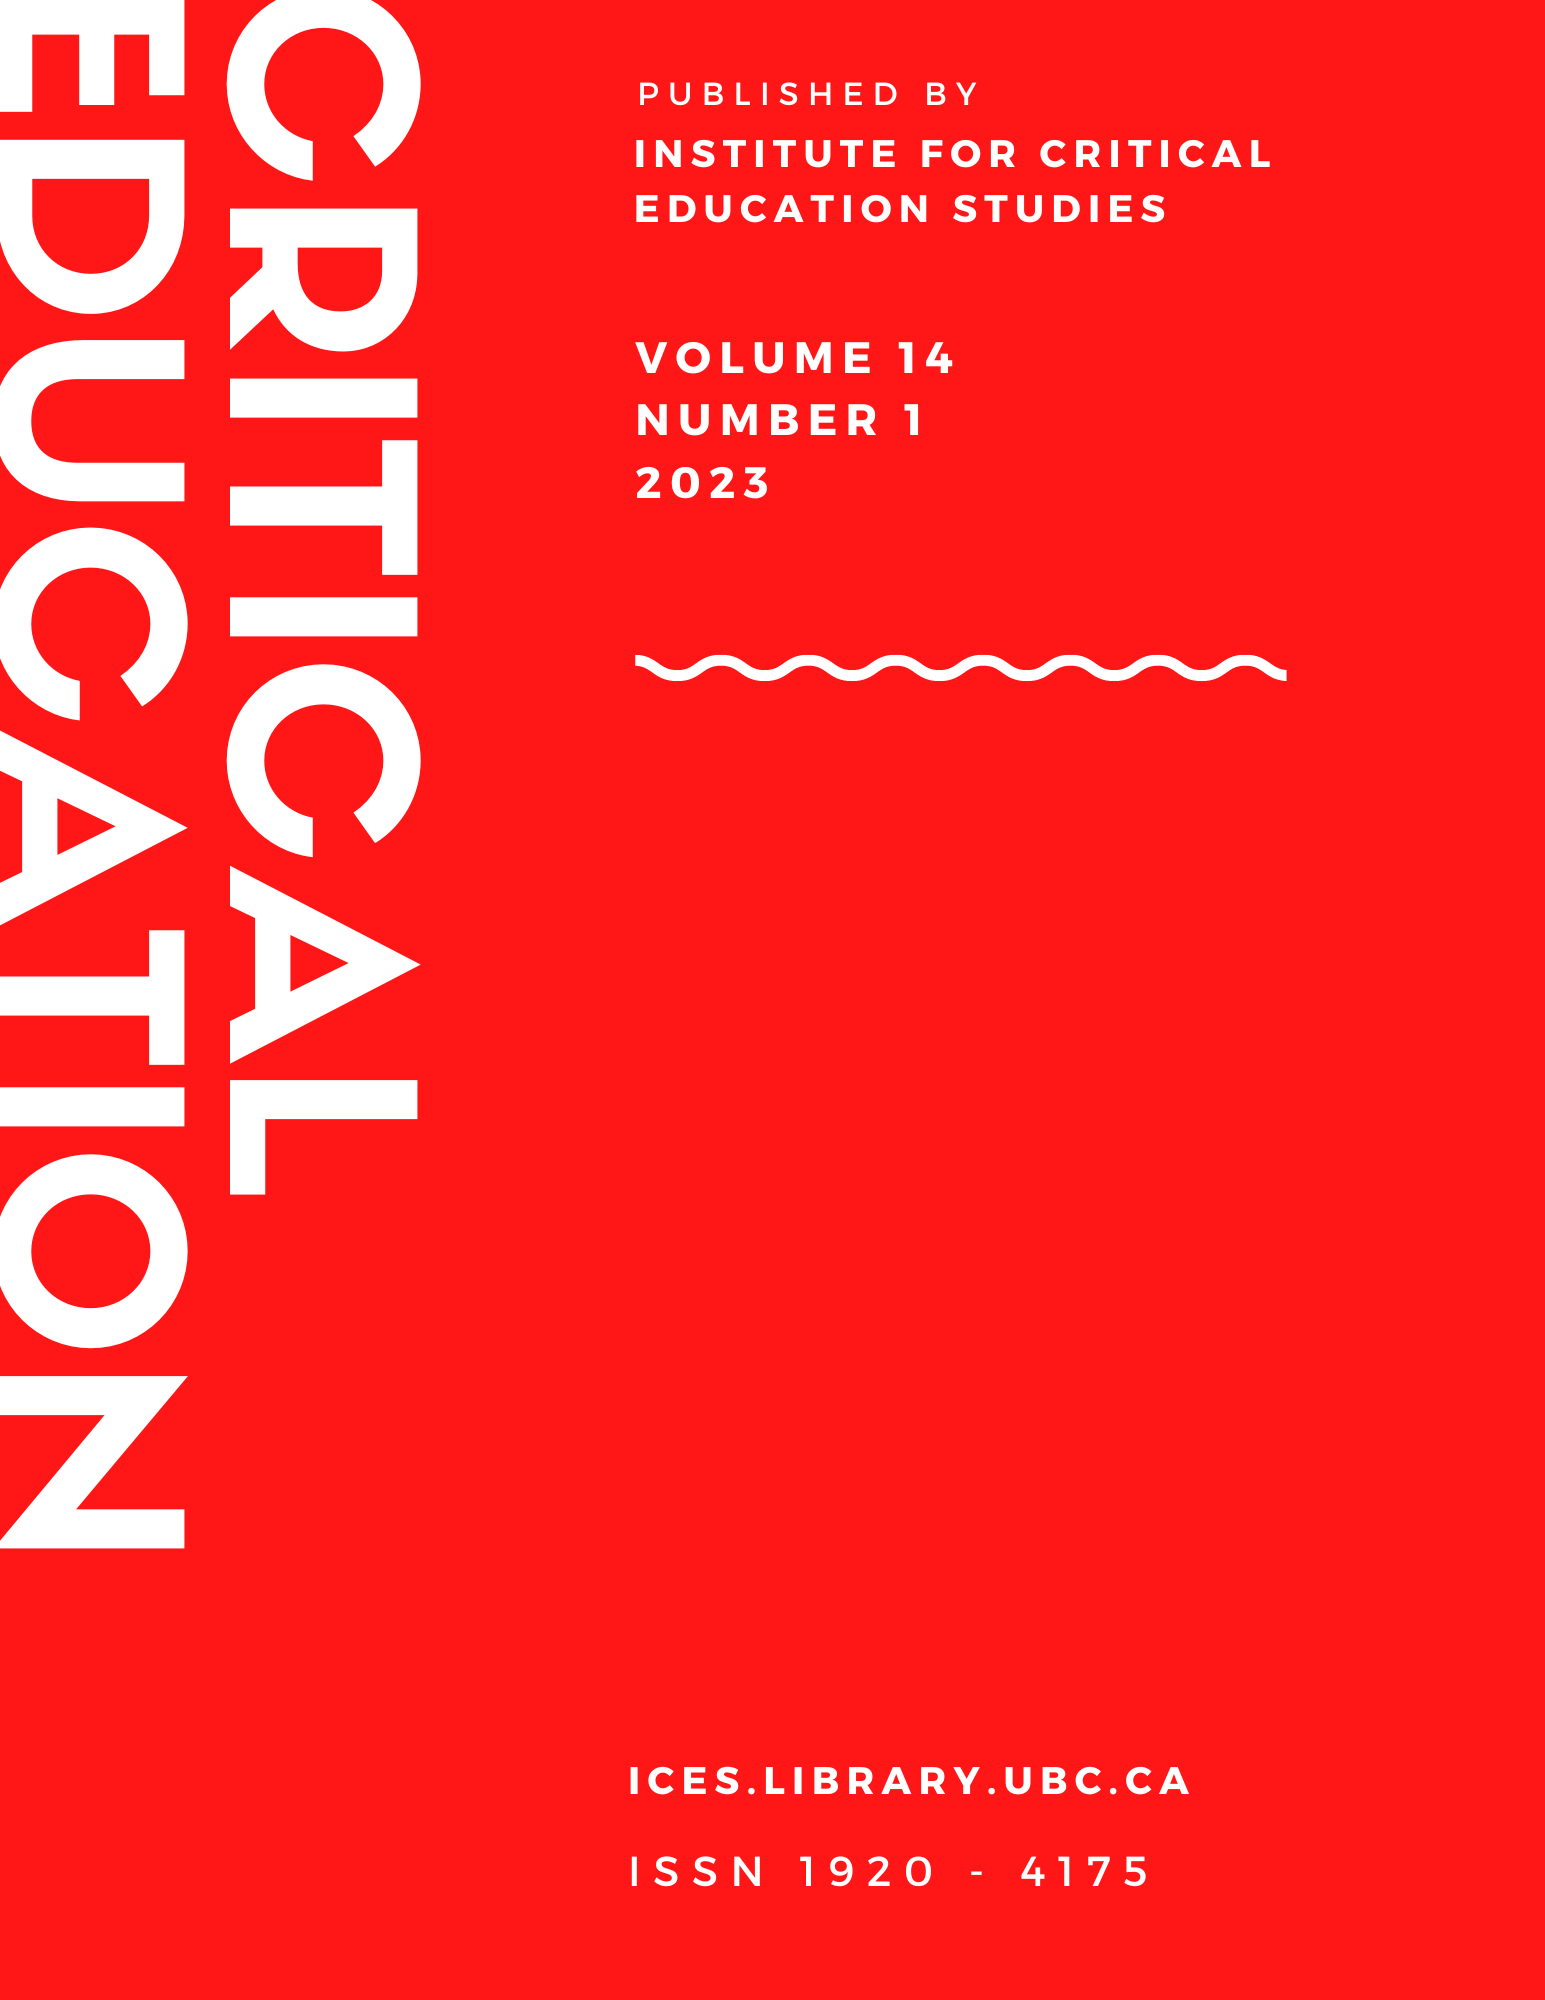 Critical Education Volume 14 Number 1 2023